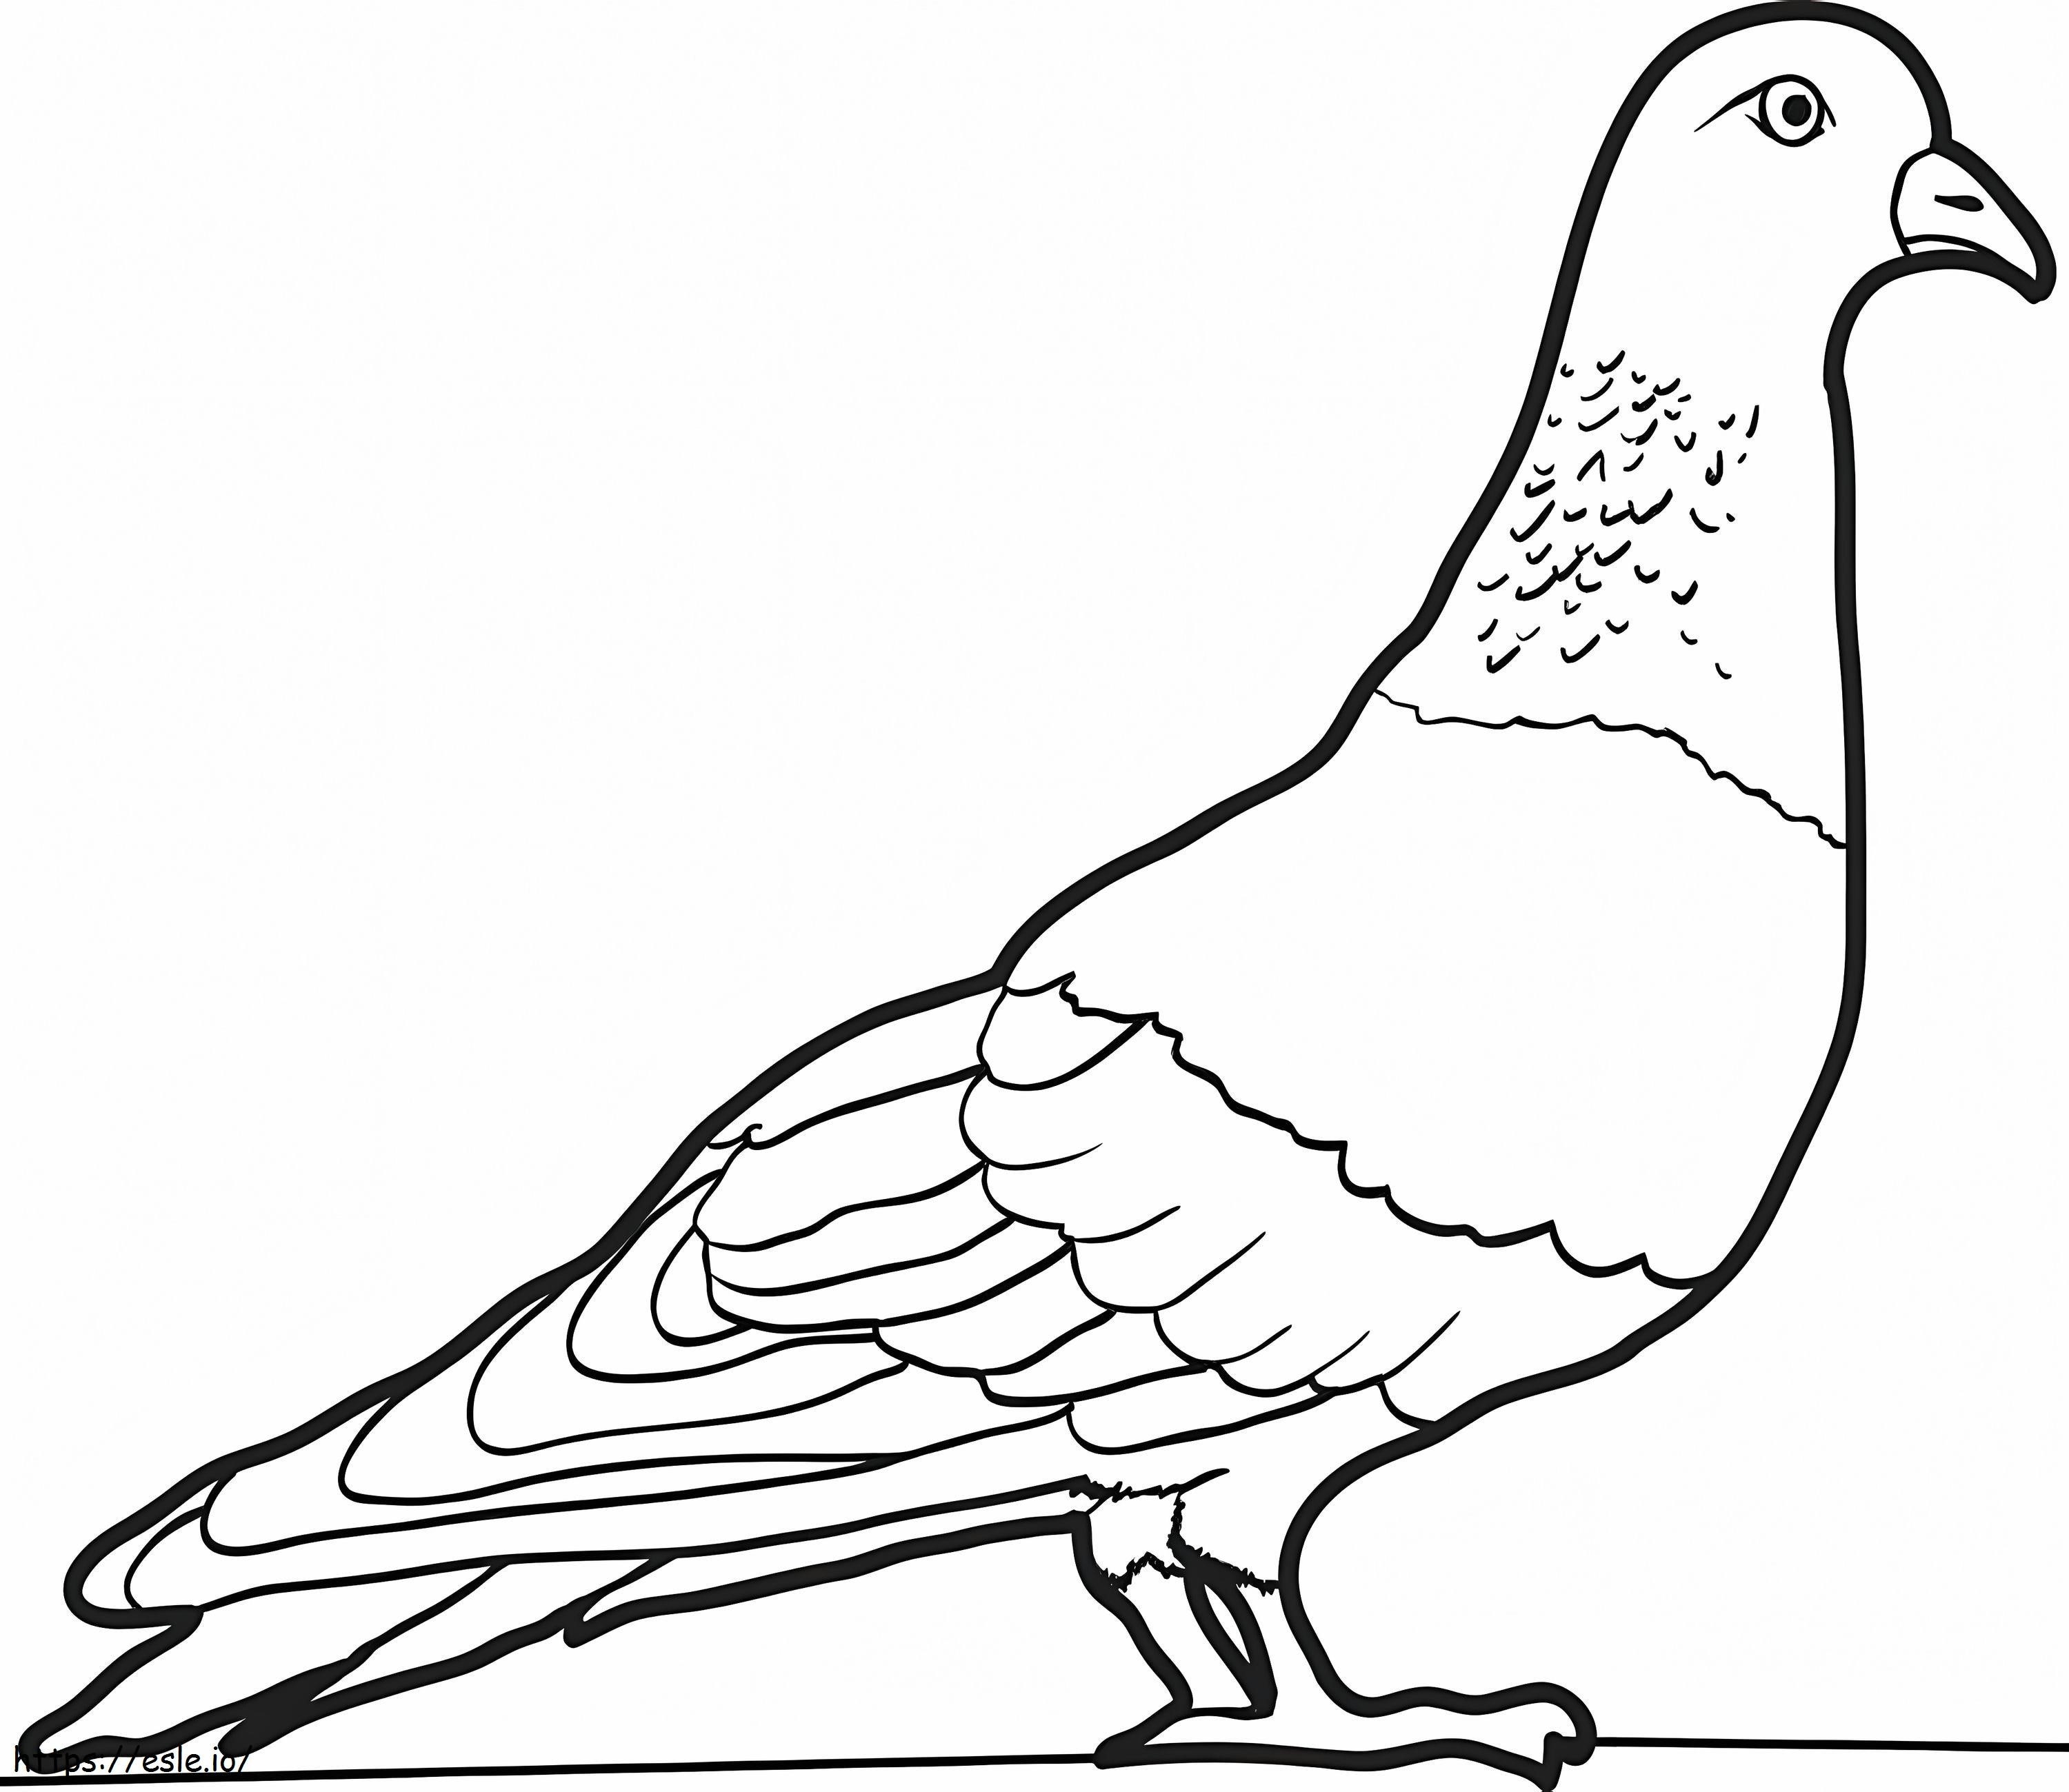 Pigeon 1 coloring page